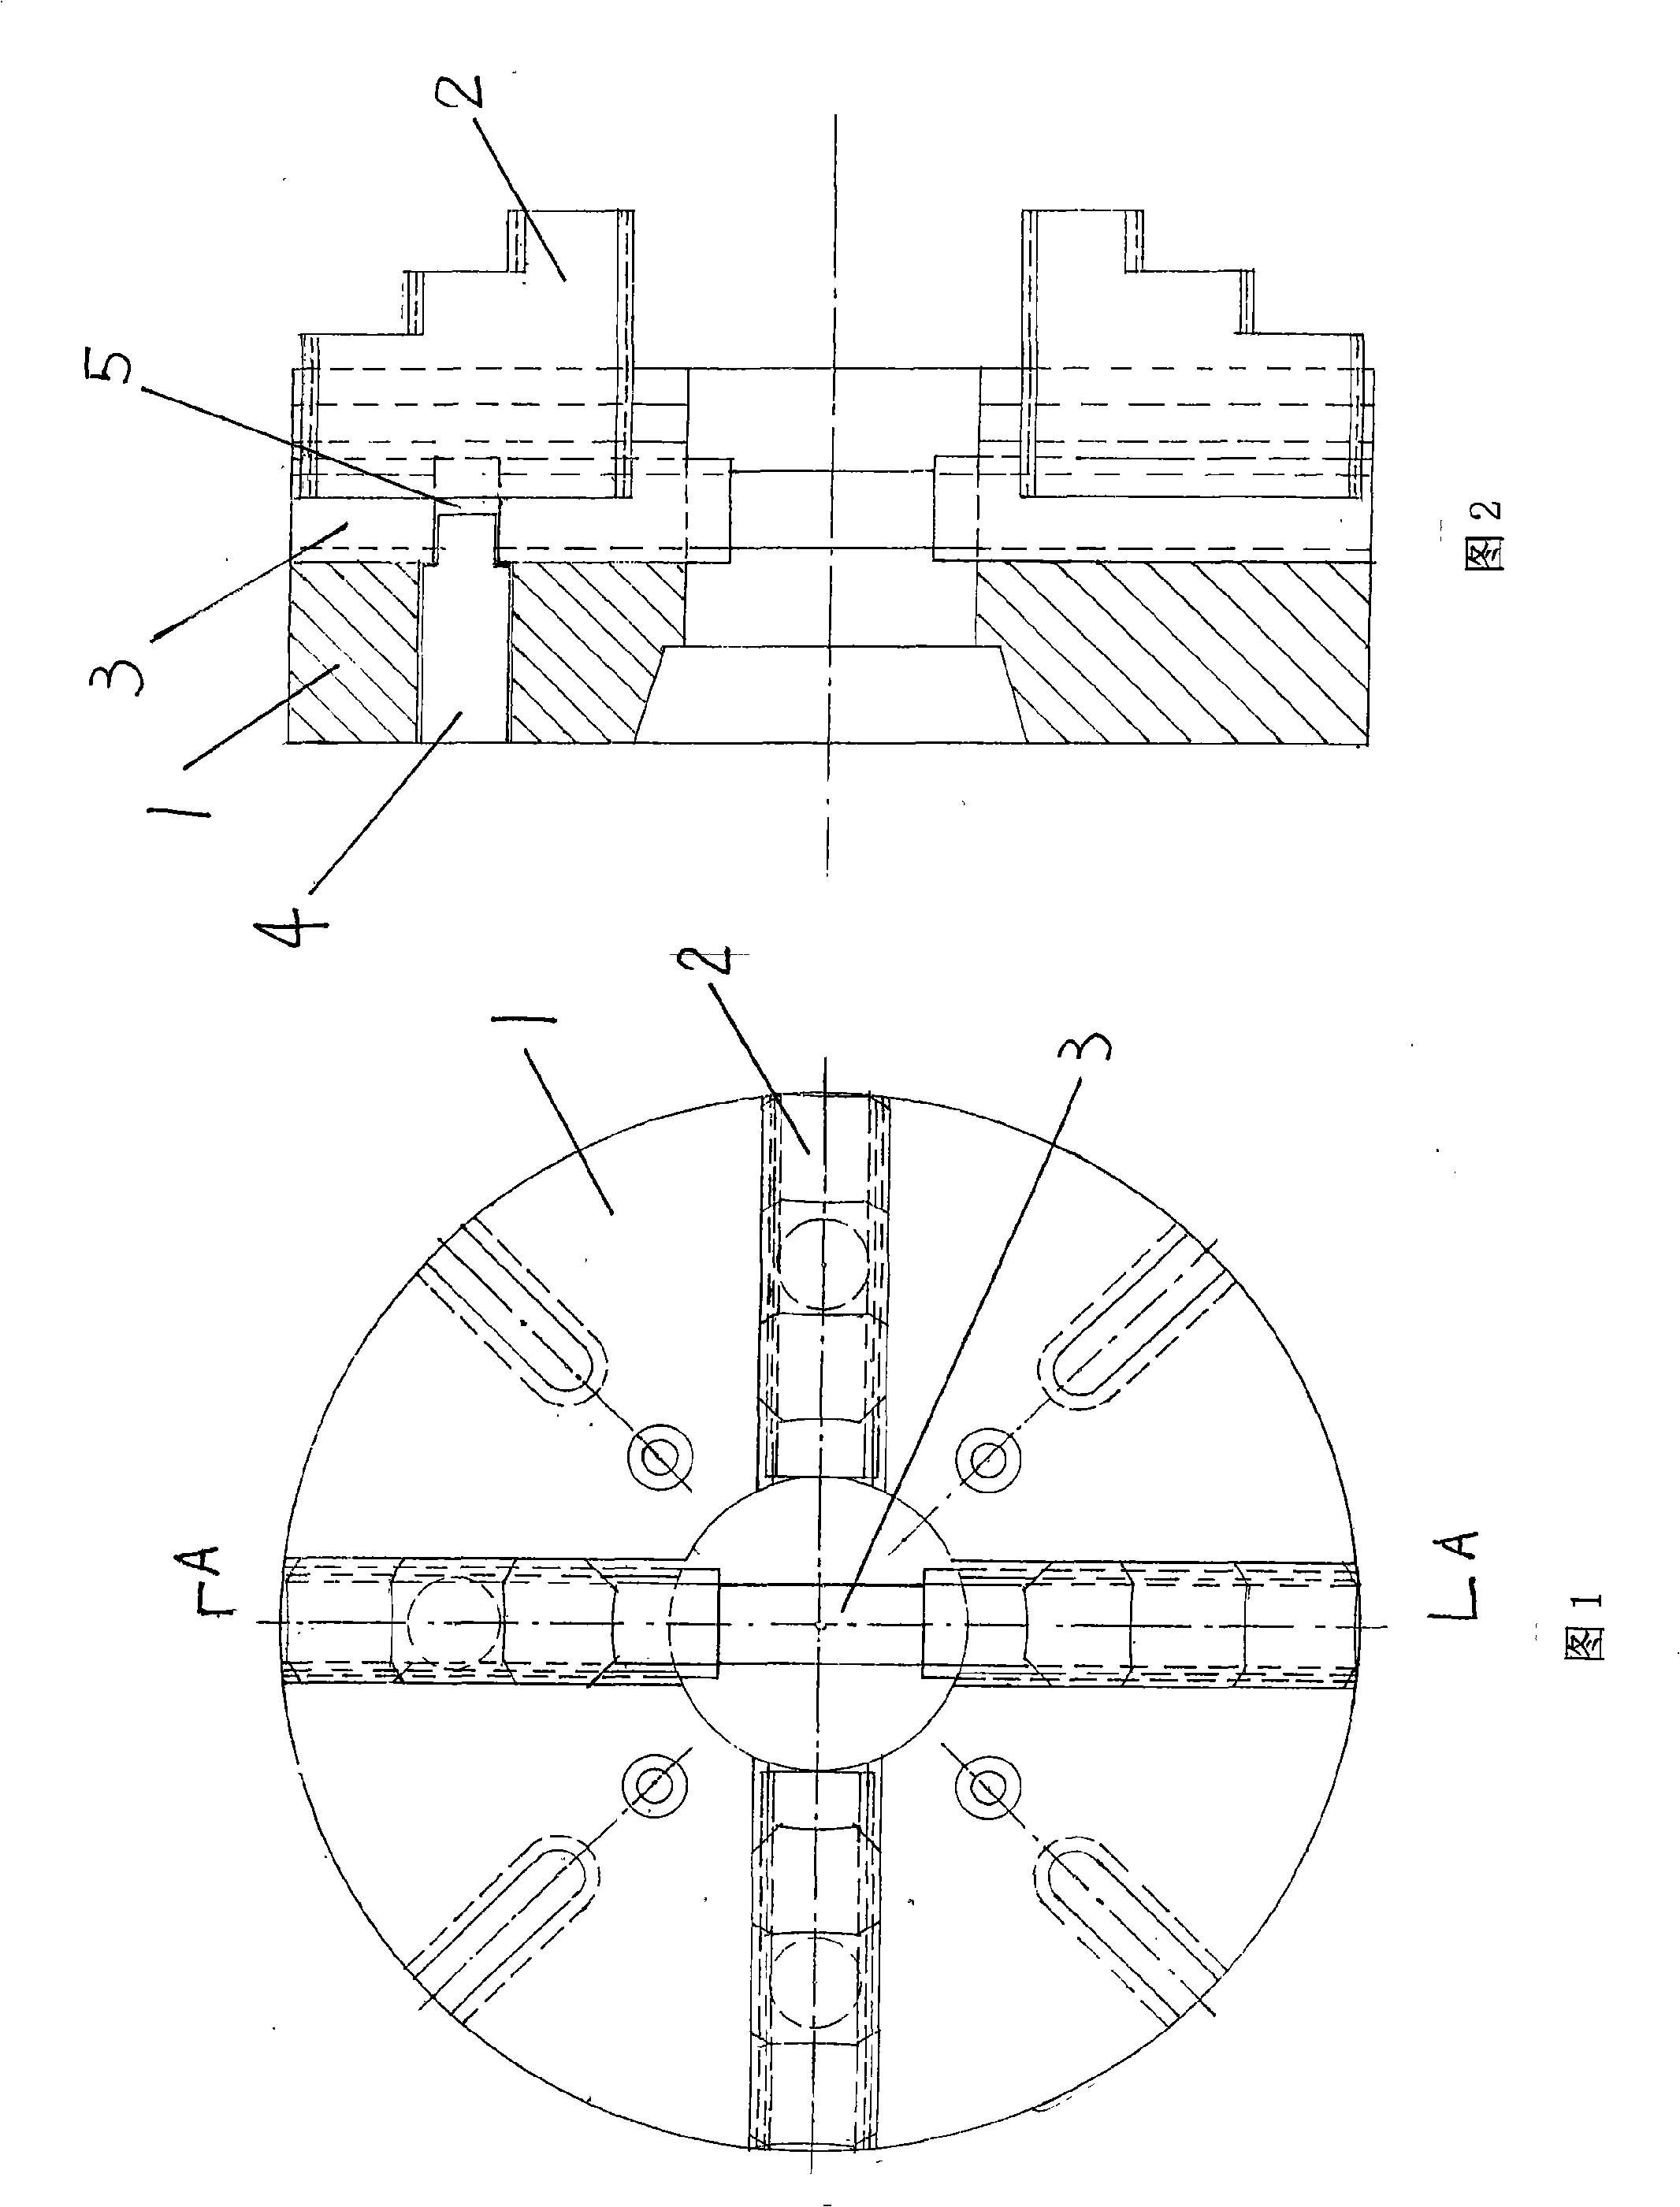 Self-centering four-jaw independent chuck